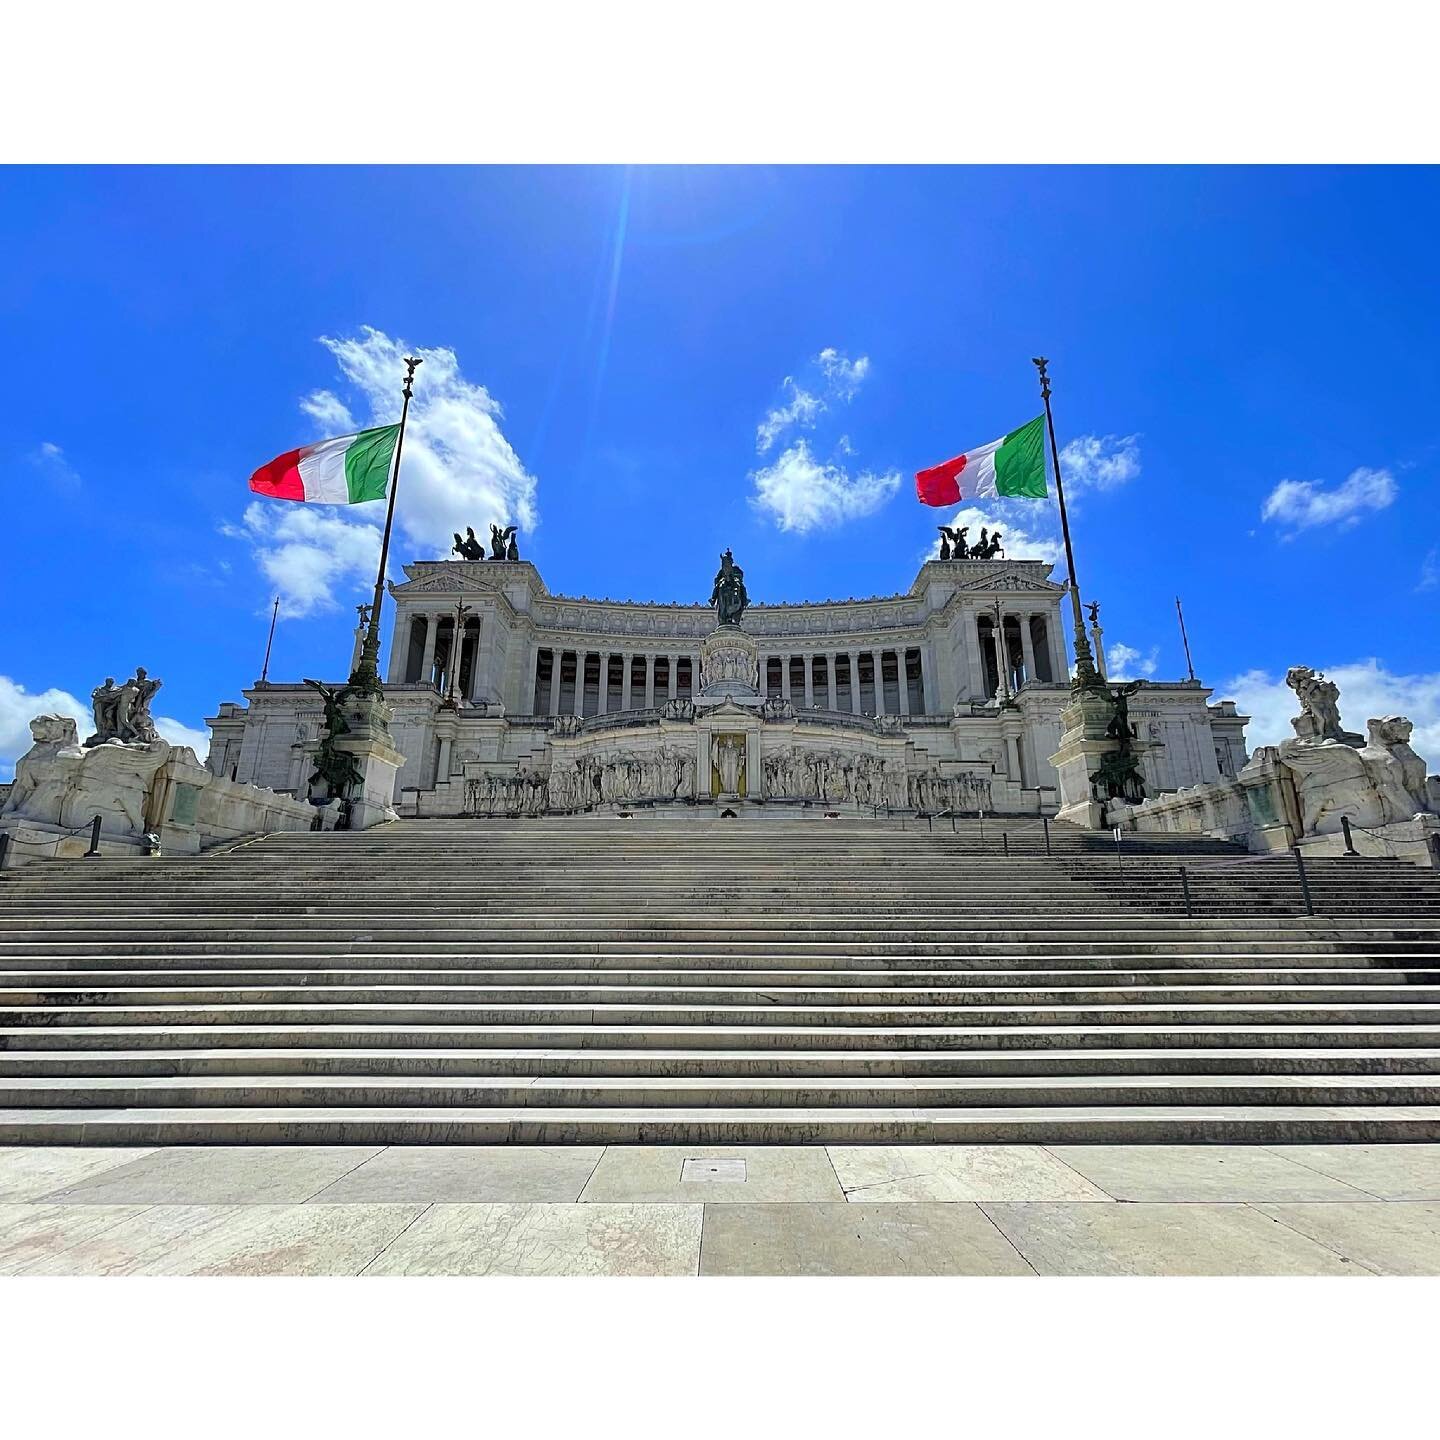 .
Italy sure can build one hell of a victory monument. 💙

Rome! 🇮🇹🤯